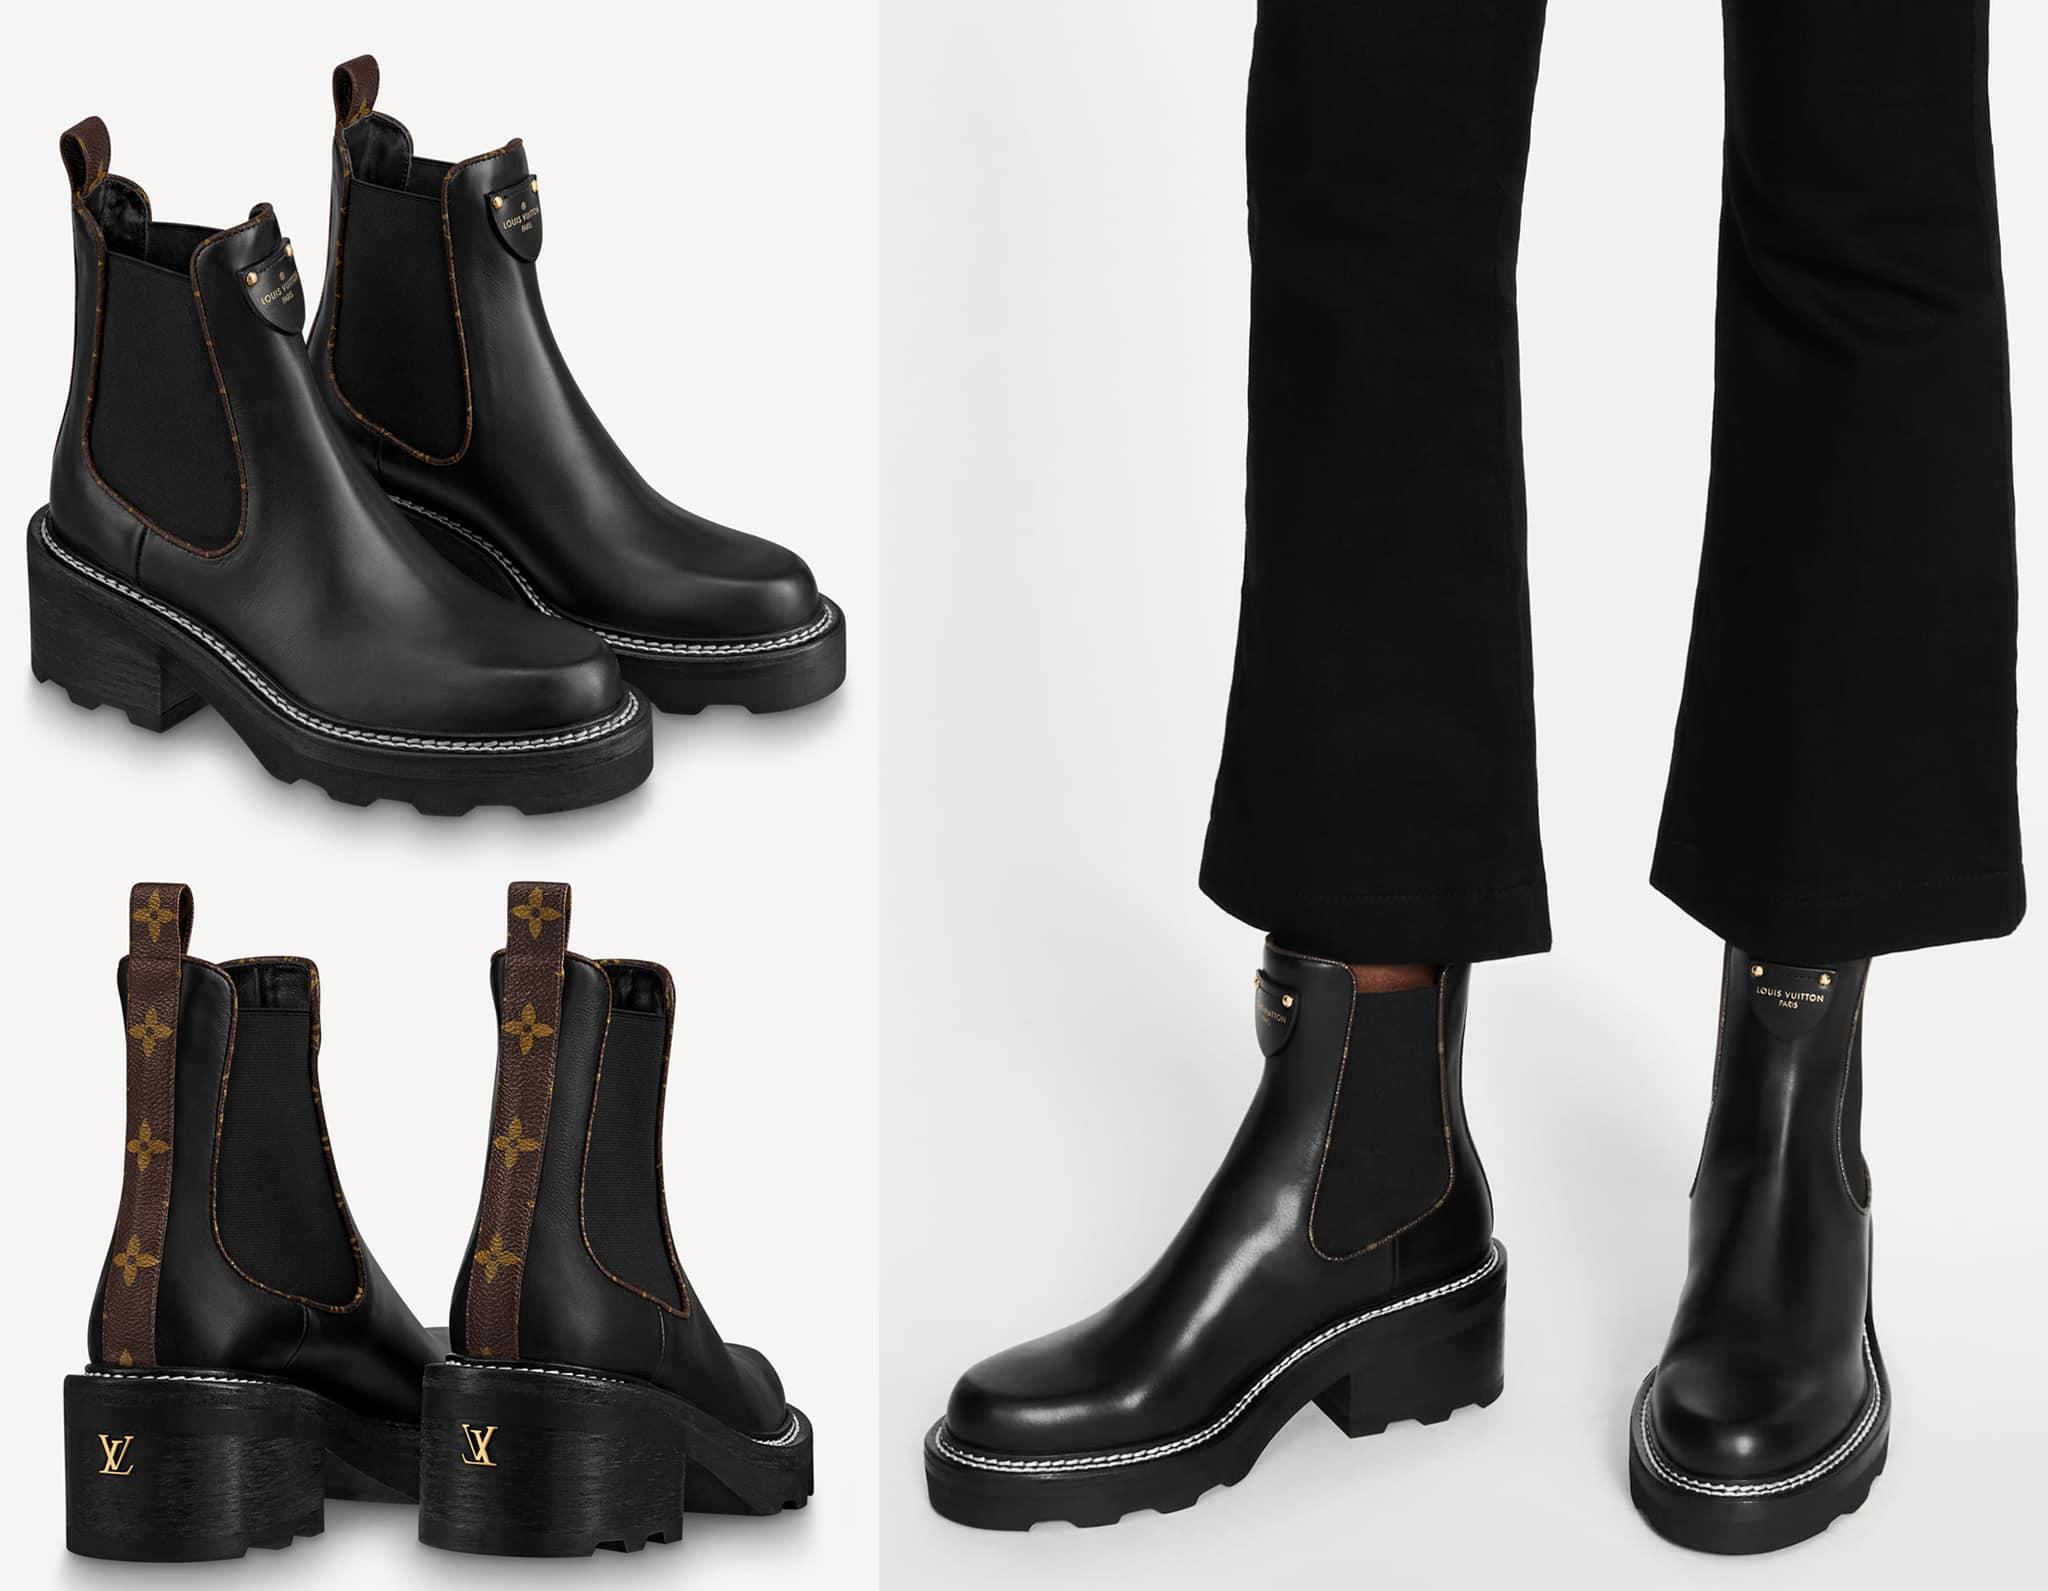 A blend of masculine and feminine aesthetics, the Beaubourg is inspired by Chelsea-style boots with chunky outsoles